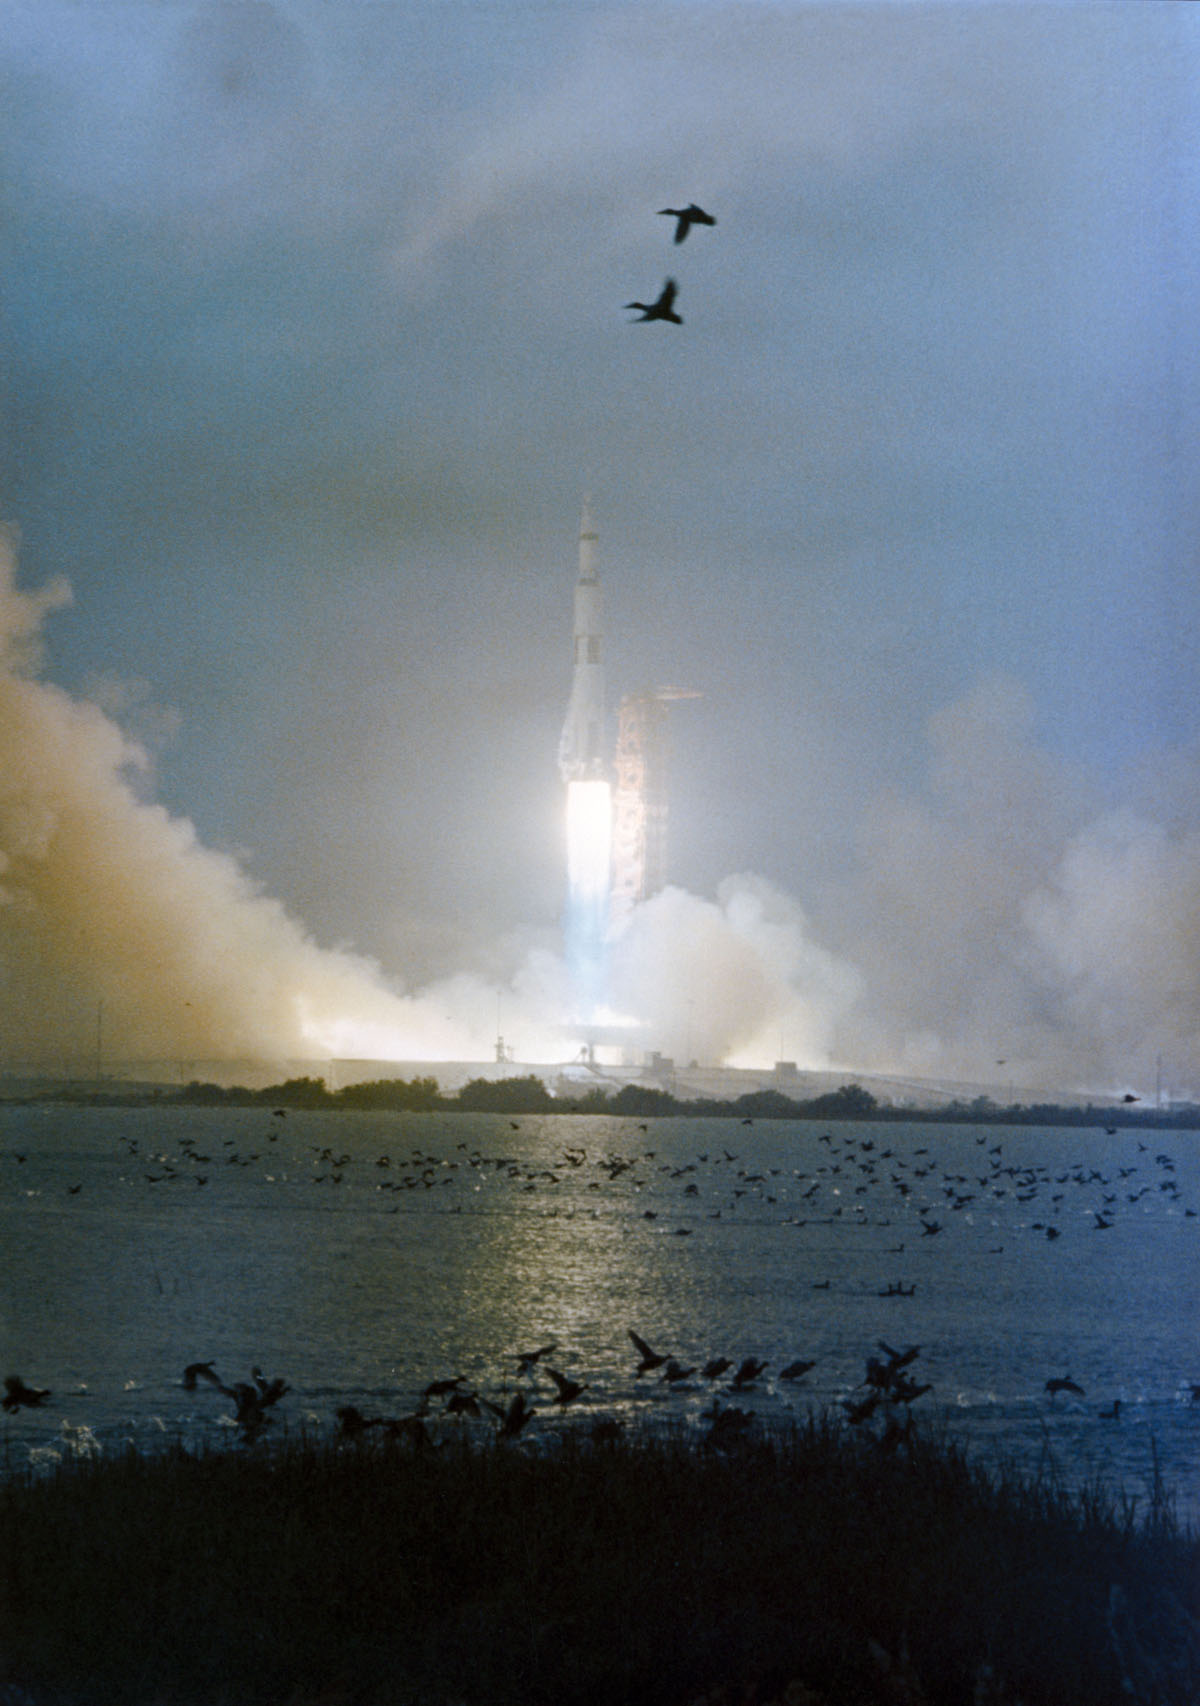 A Brief History Of Animals And Rocket Launches Not Getting Along